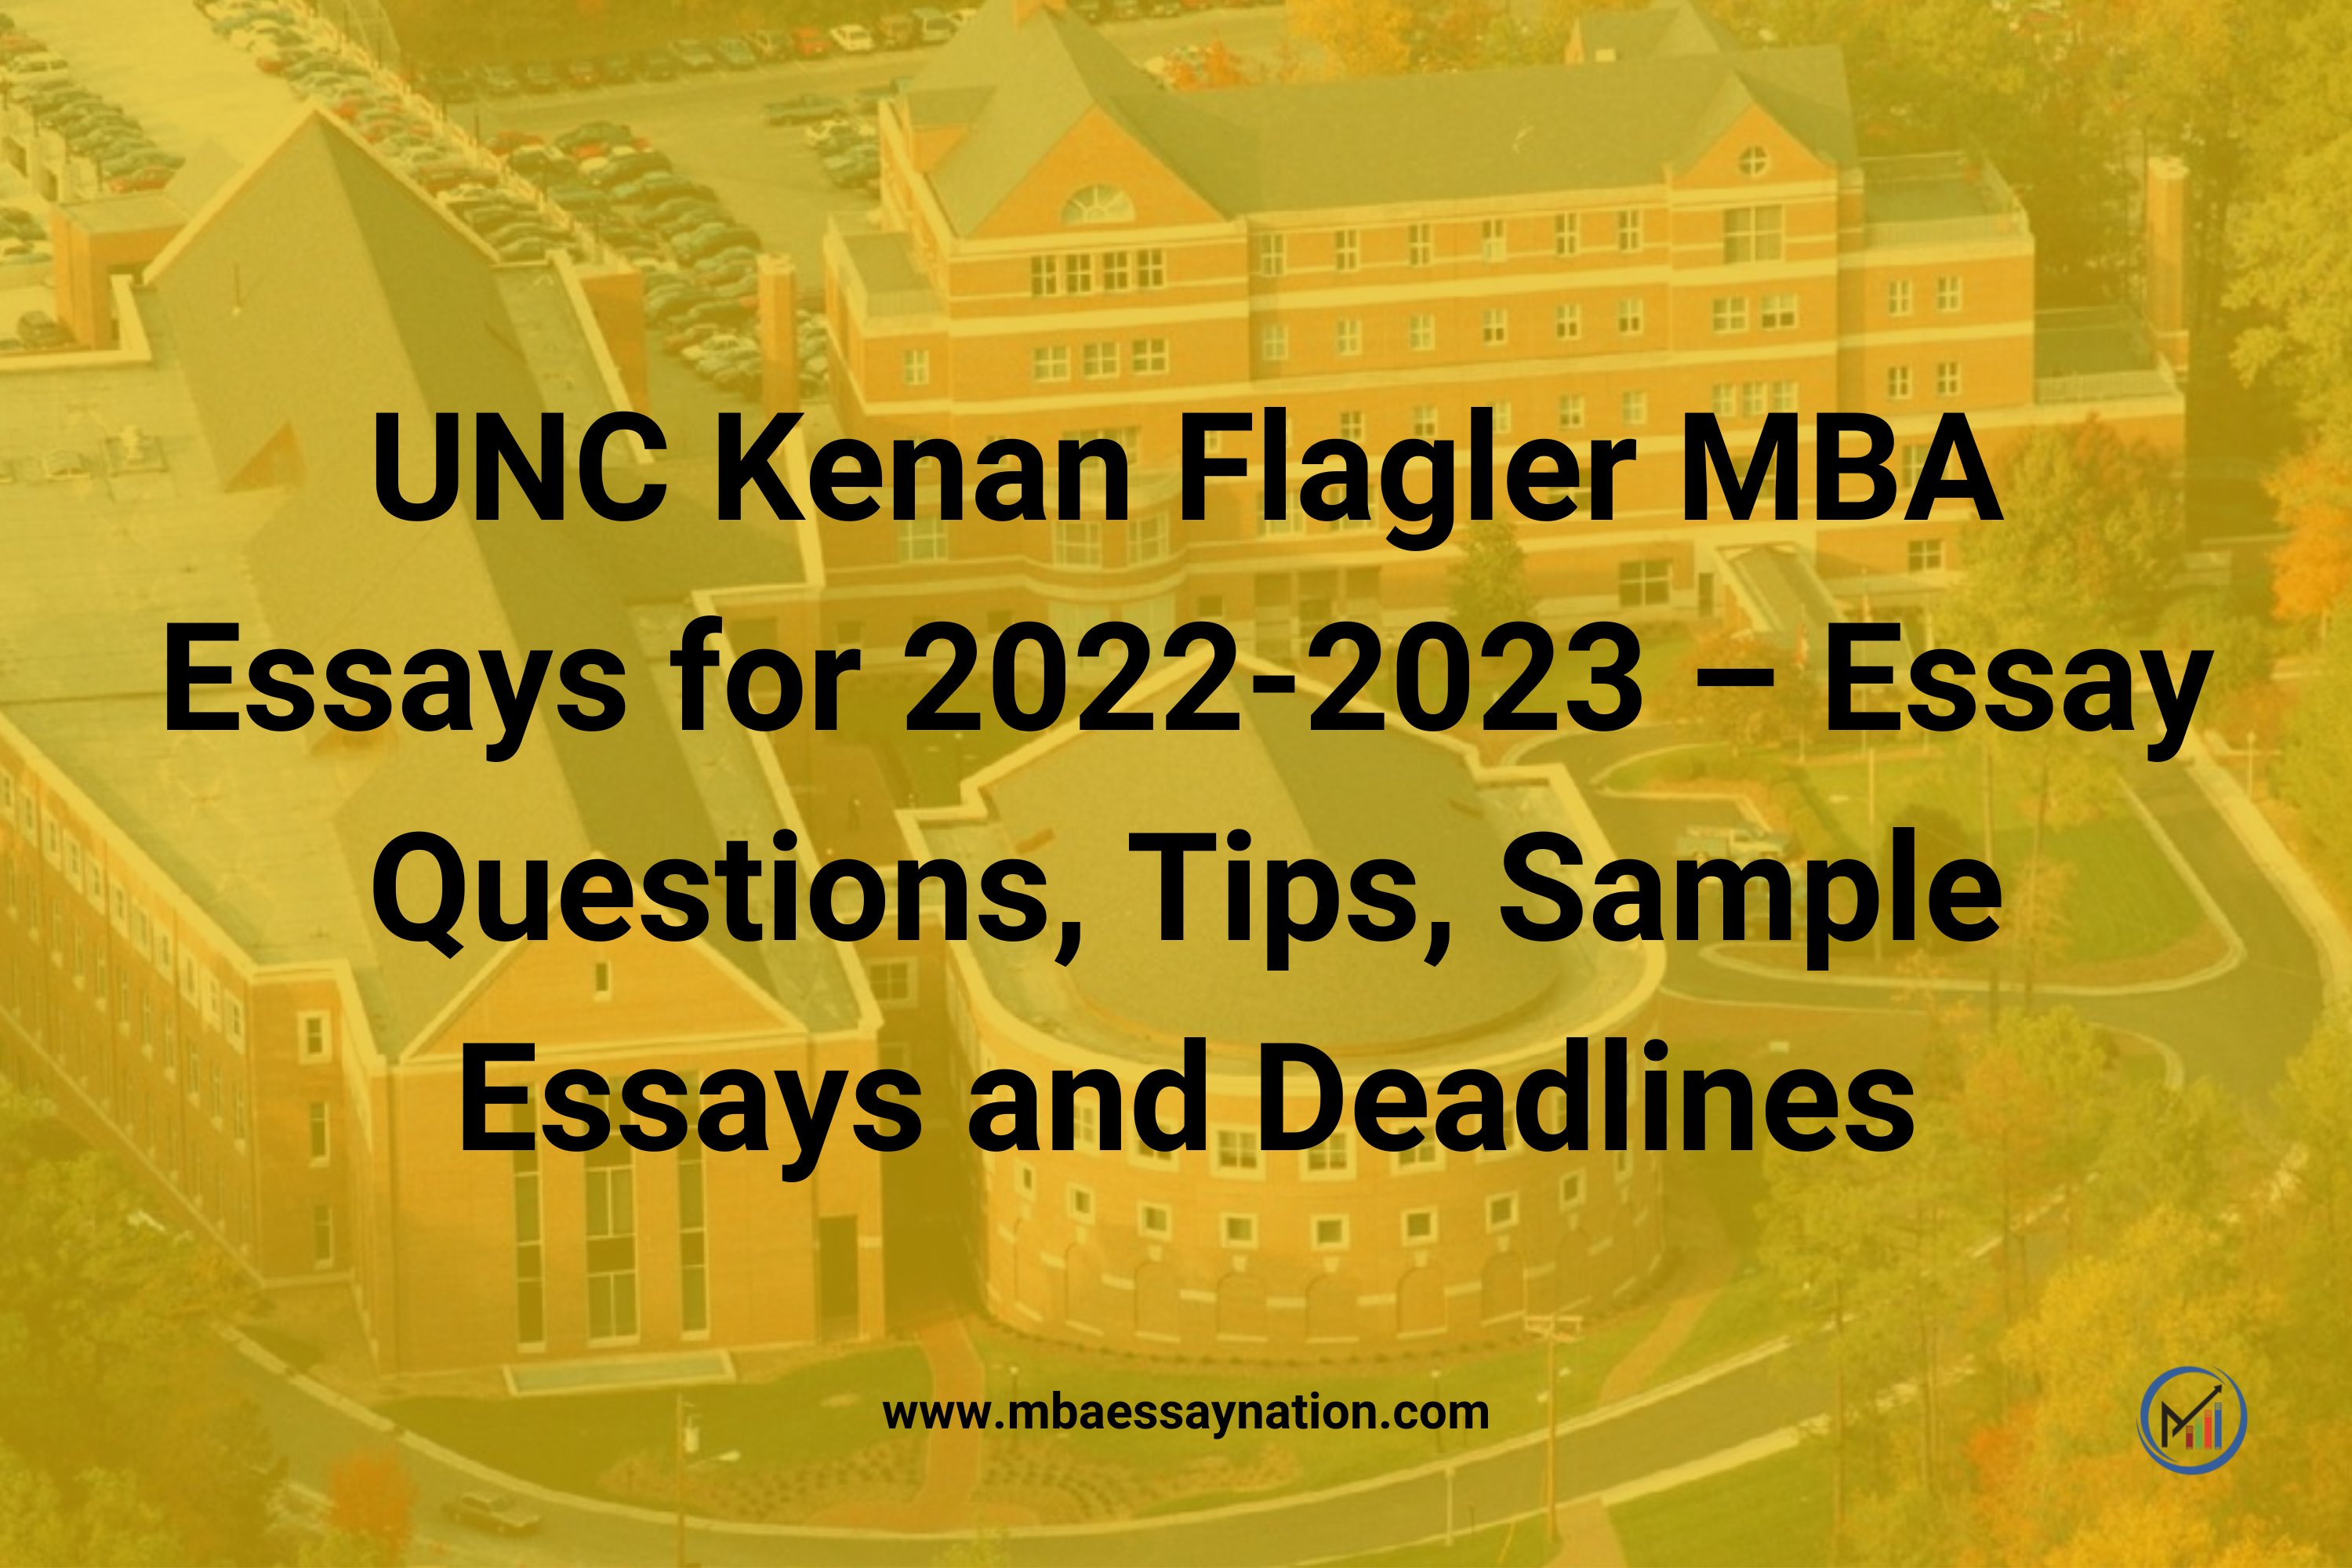 Kenan Flagler MBA Essays for 2022-2023 – Essay Questions, Sample Essays, Tips, and Deadlines